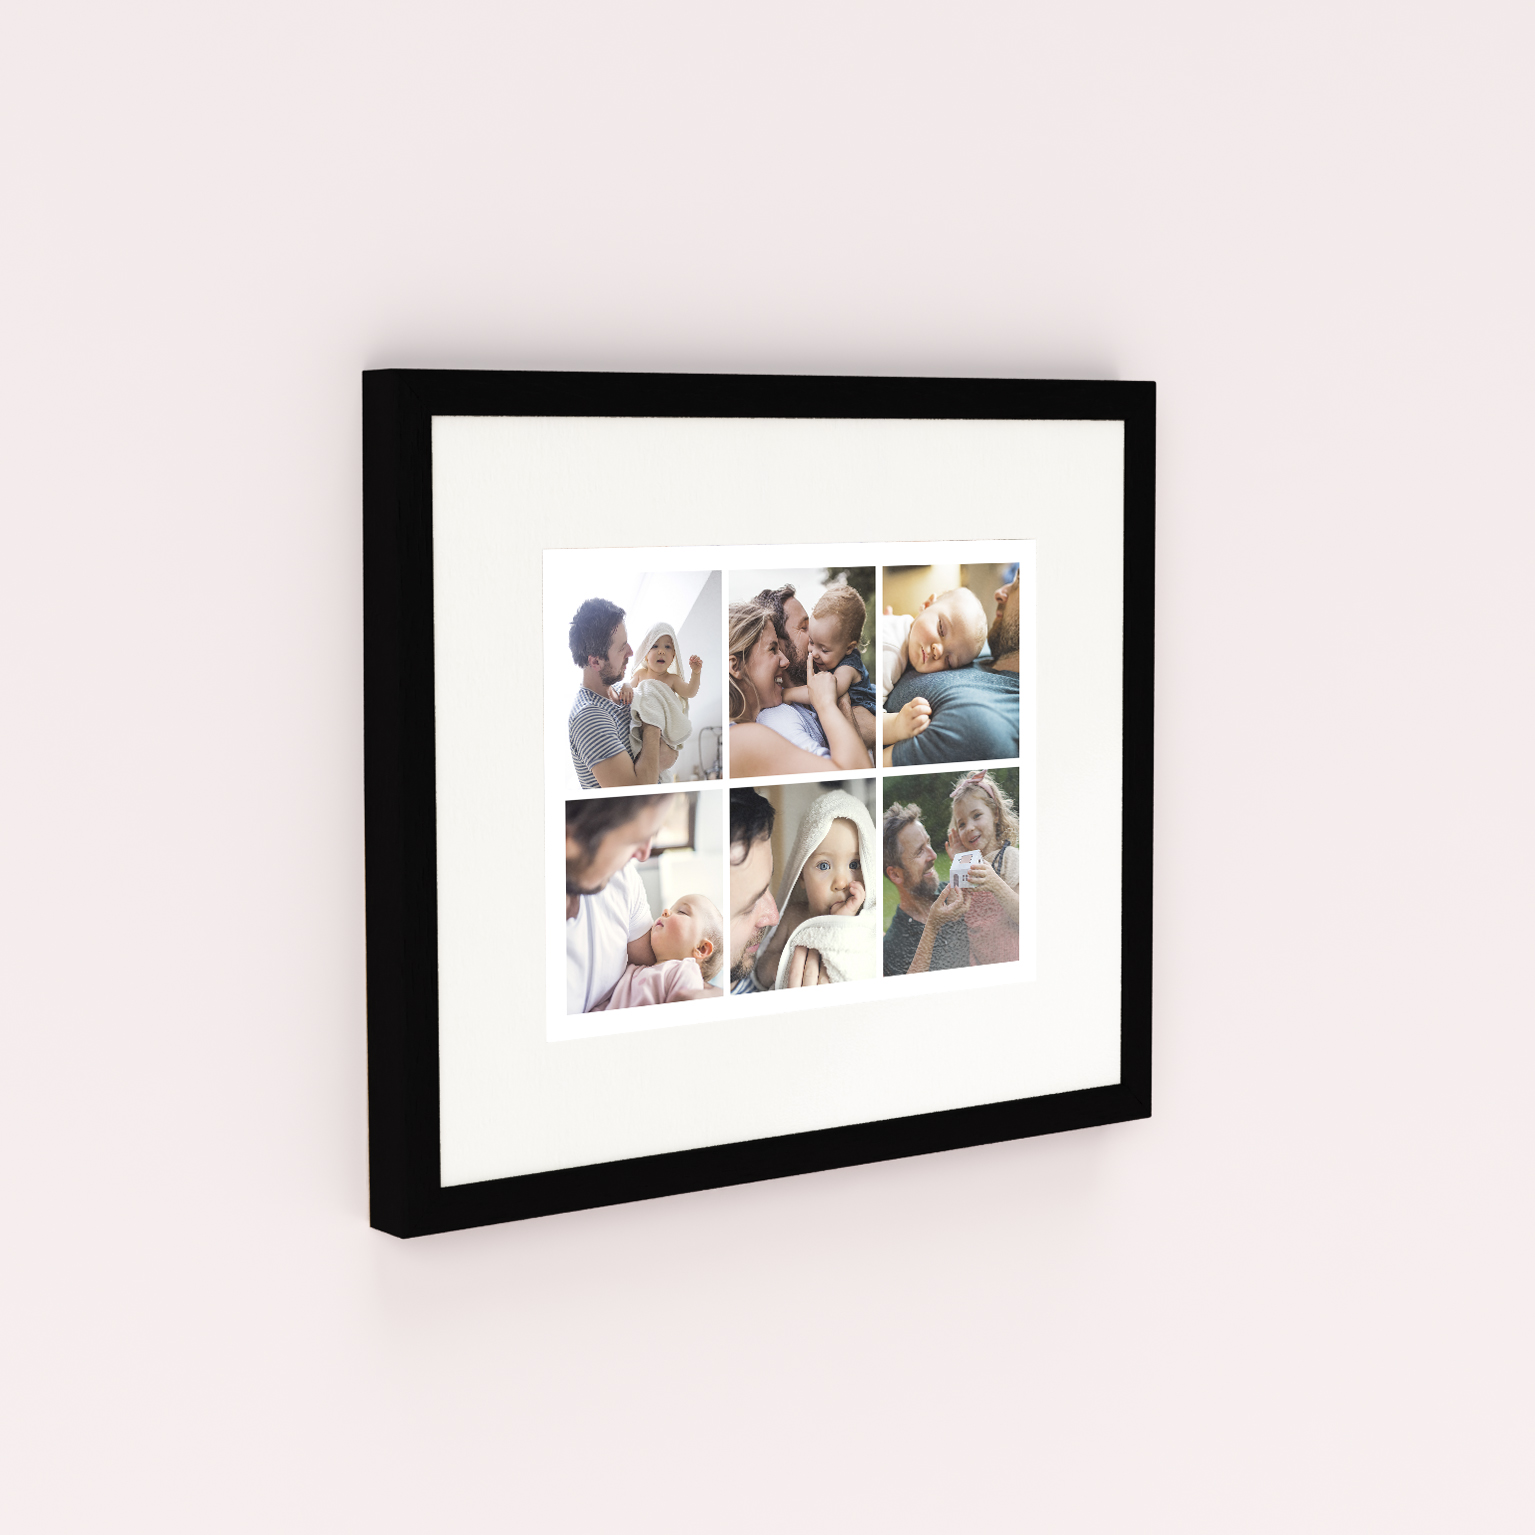 Moments Mosaic Framed Photo Print - Transform cherished moments into a sophisticated masterpiece with this landscape-oriented print showcasing 6 photos in a stunning mosaic design. The cream frame adds elegance, turning each photo into a timeless piece of art.